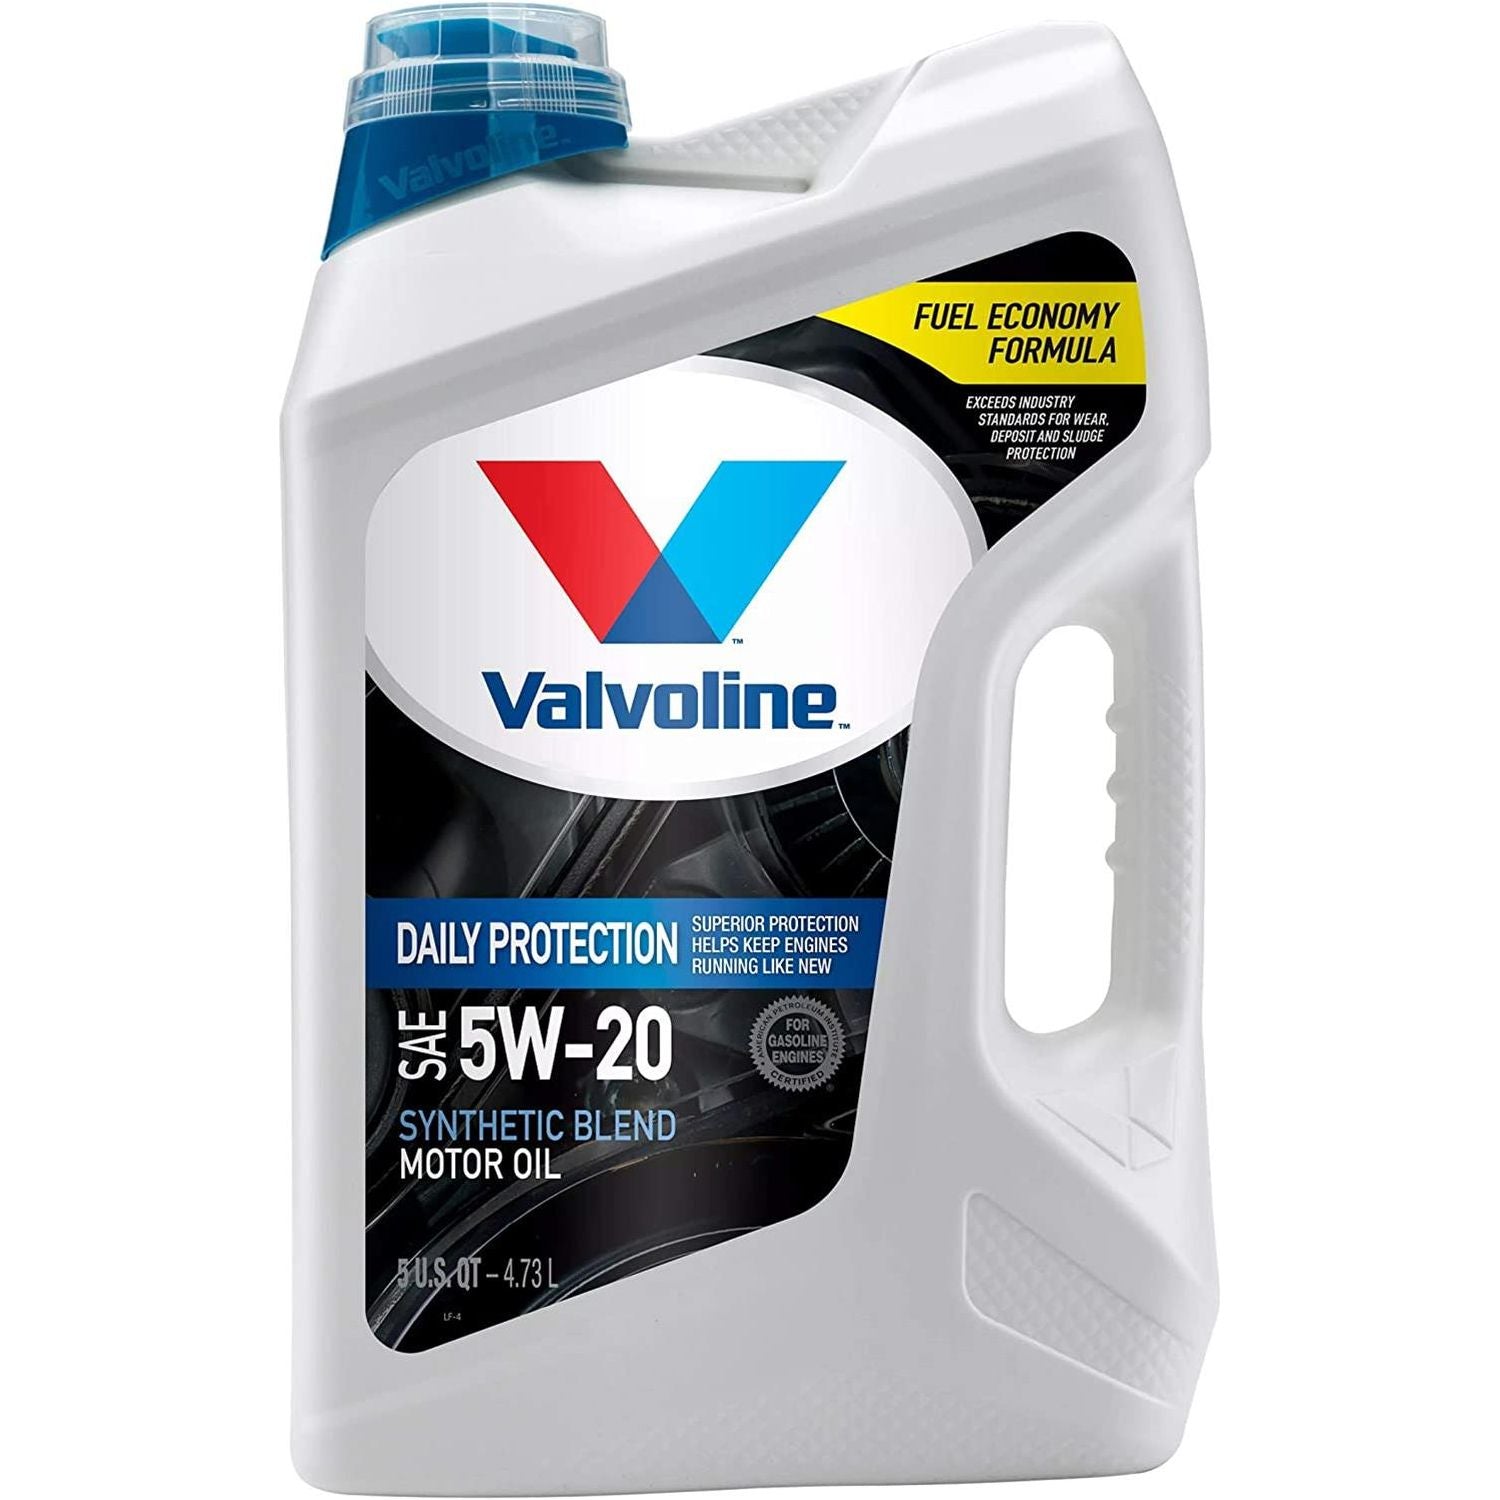 Valvoline Conventional Synthetic Blend Engine Oil 5W-20 5 Quart 881158